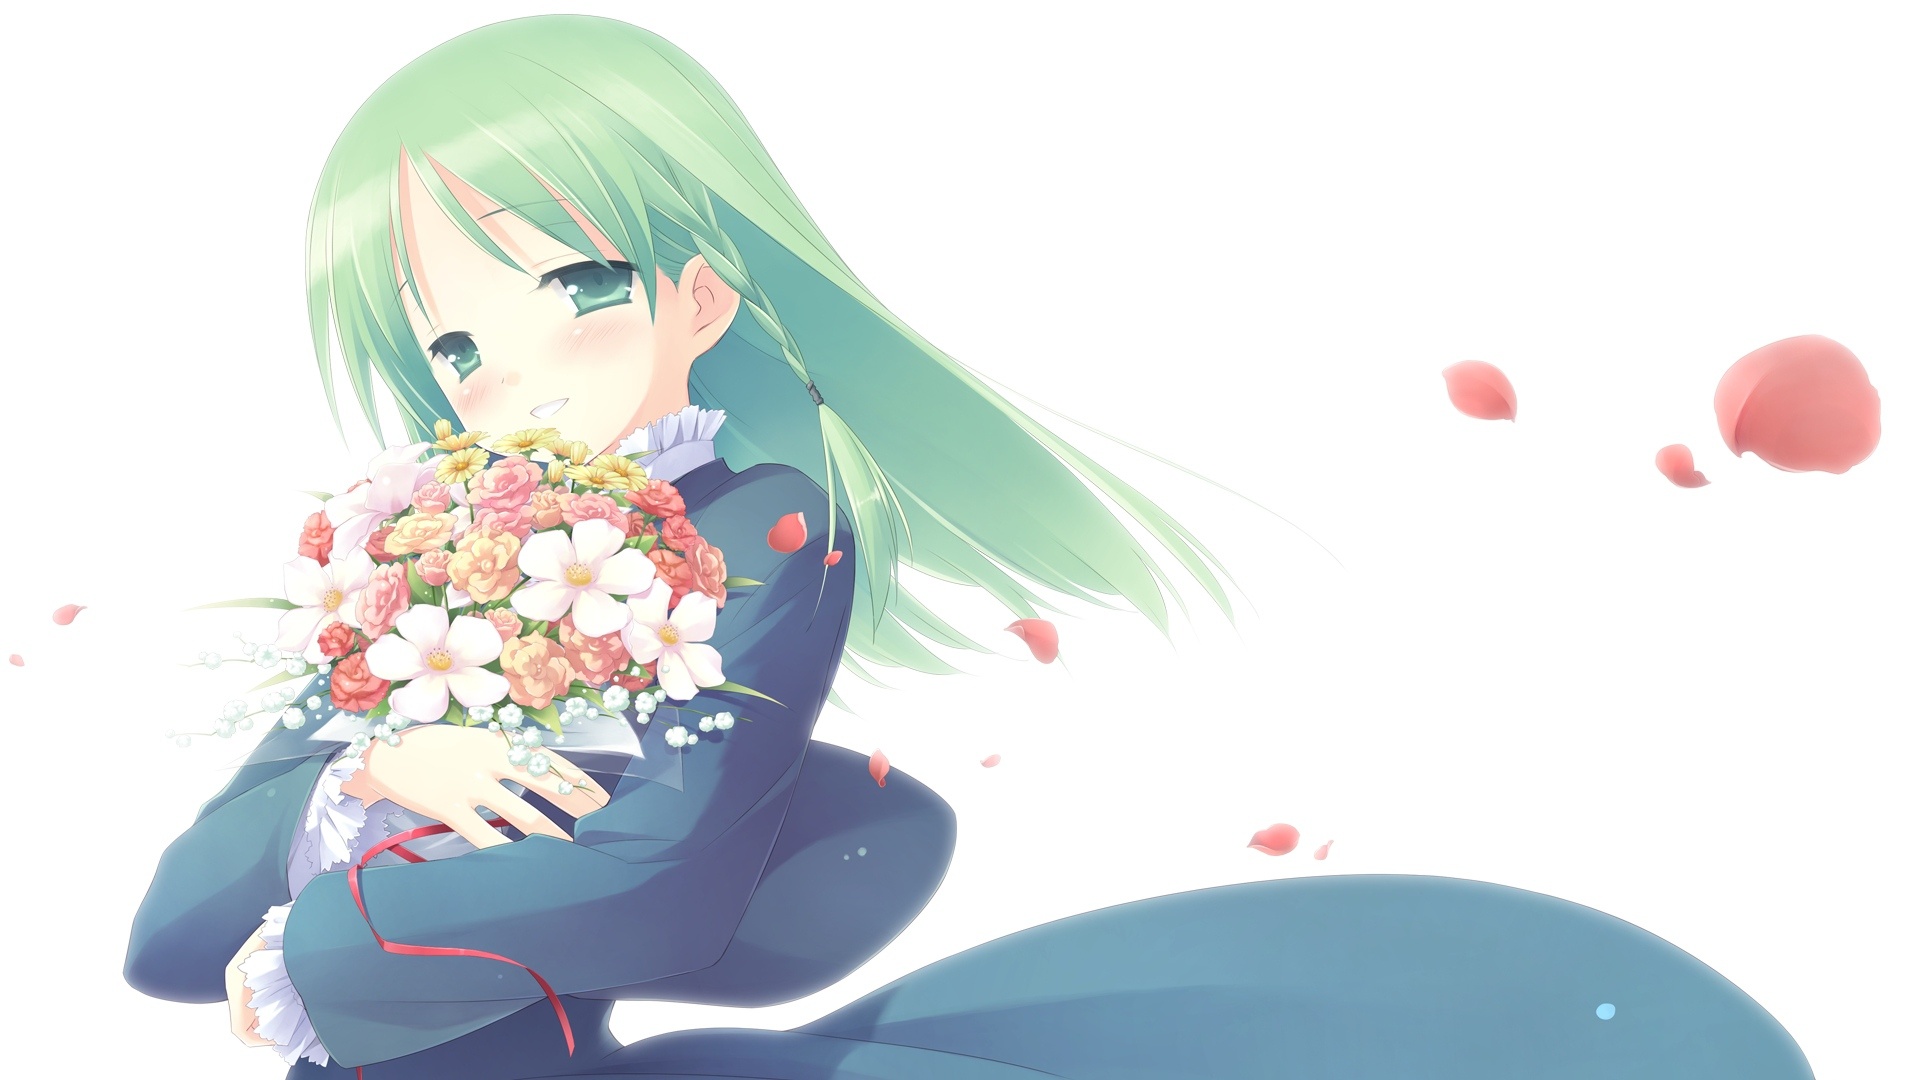 Anime Girl And Flowers free background